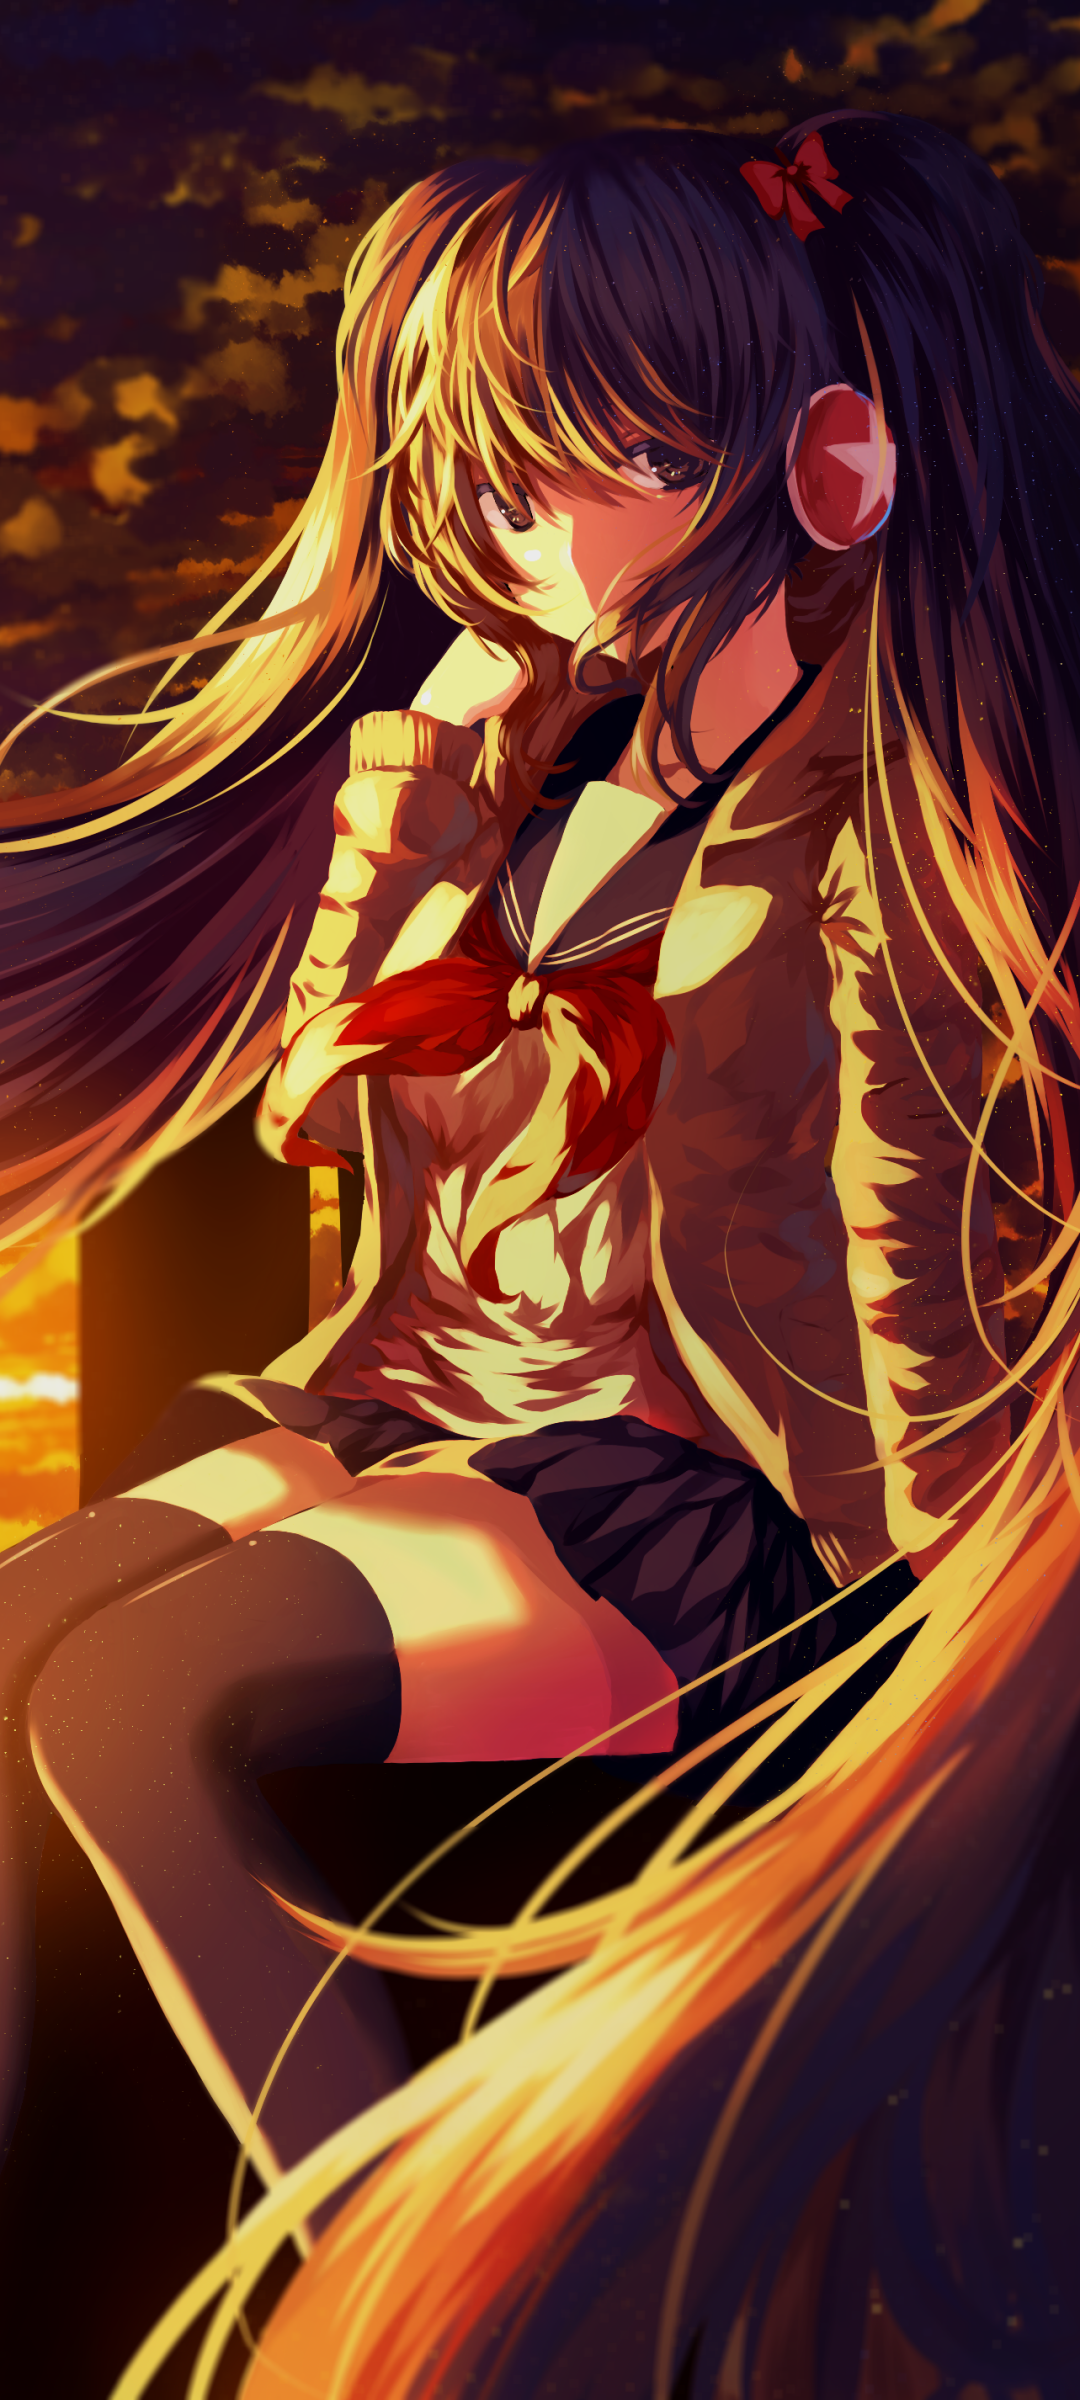 Anime Vocaloid Phone Wallpaper by Isumi